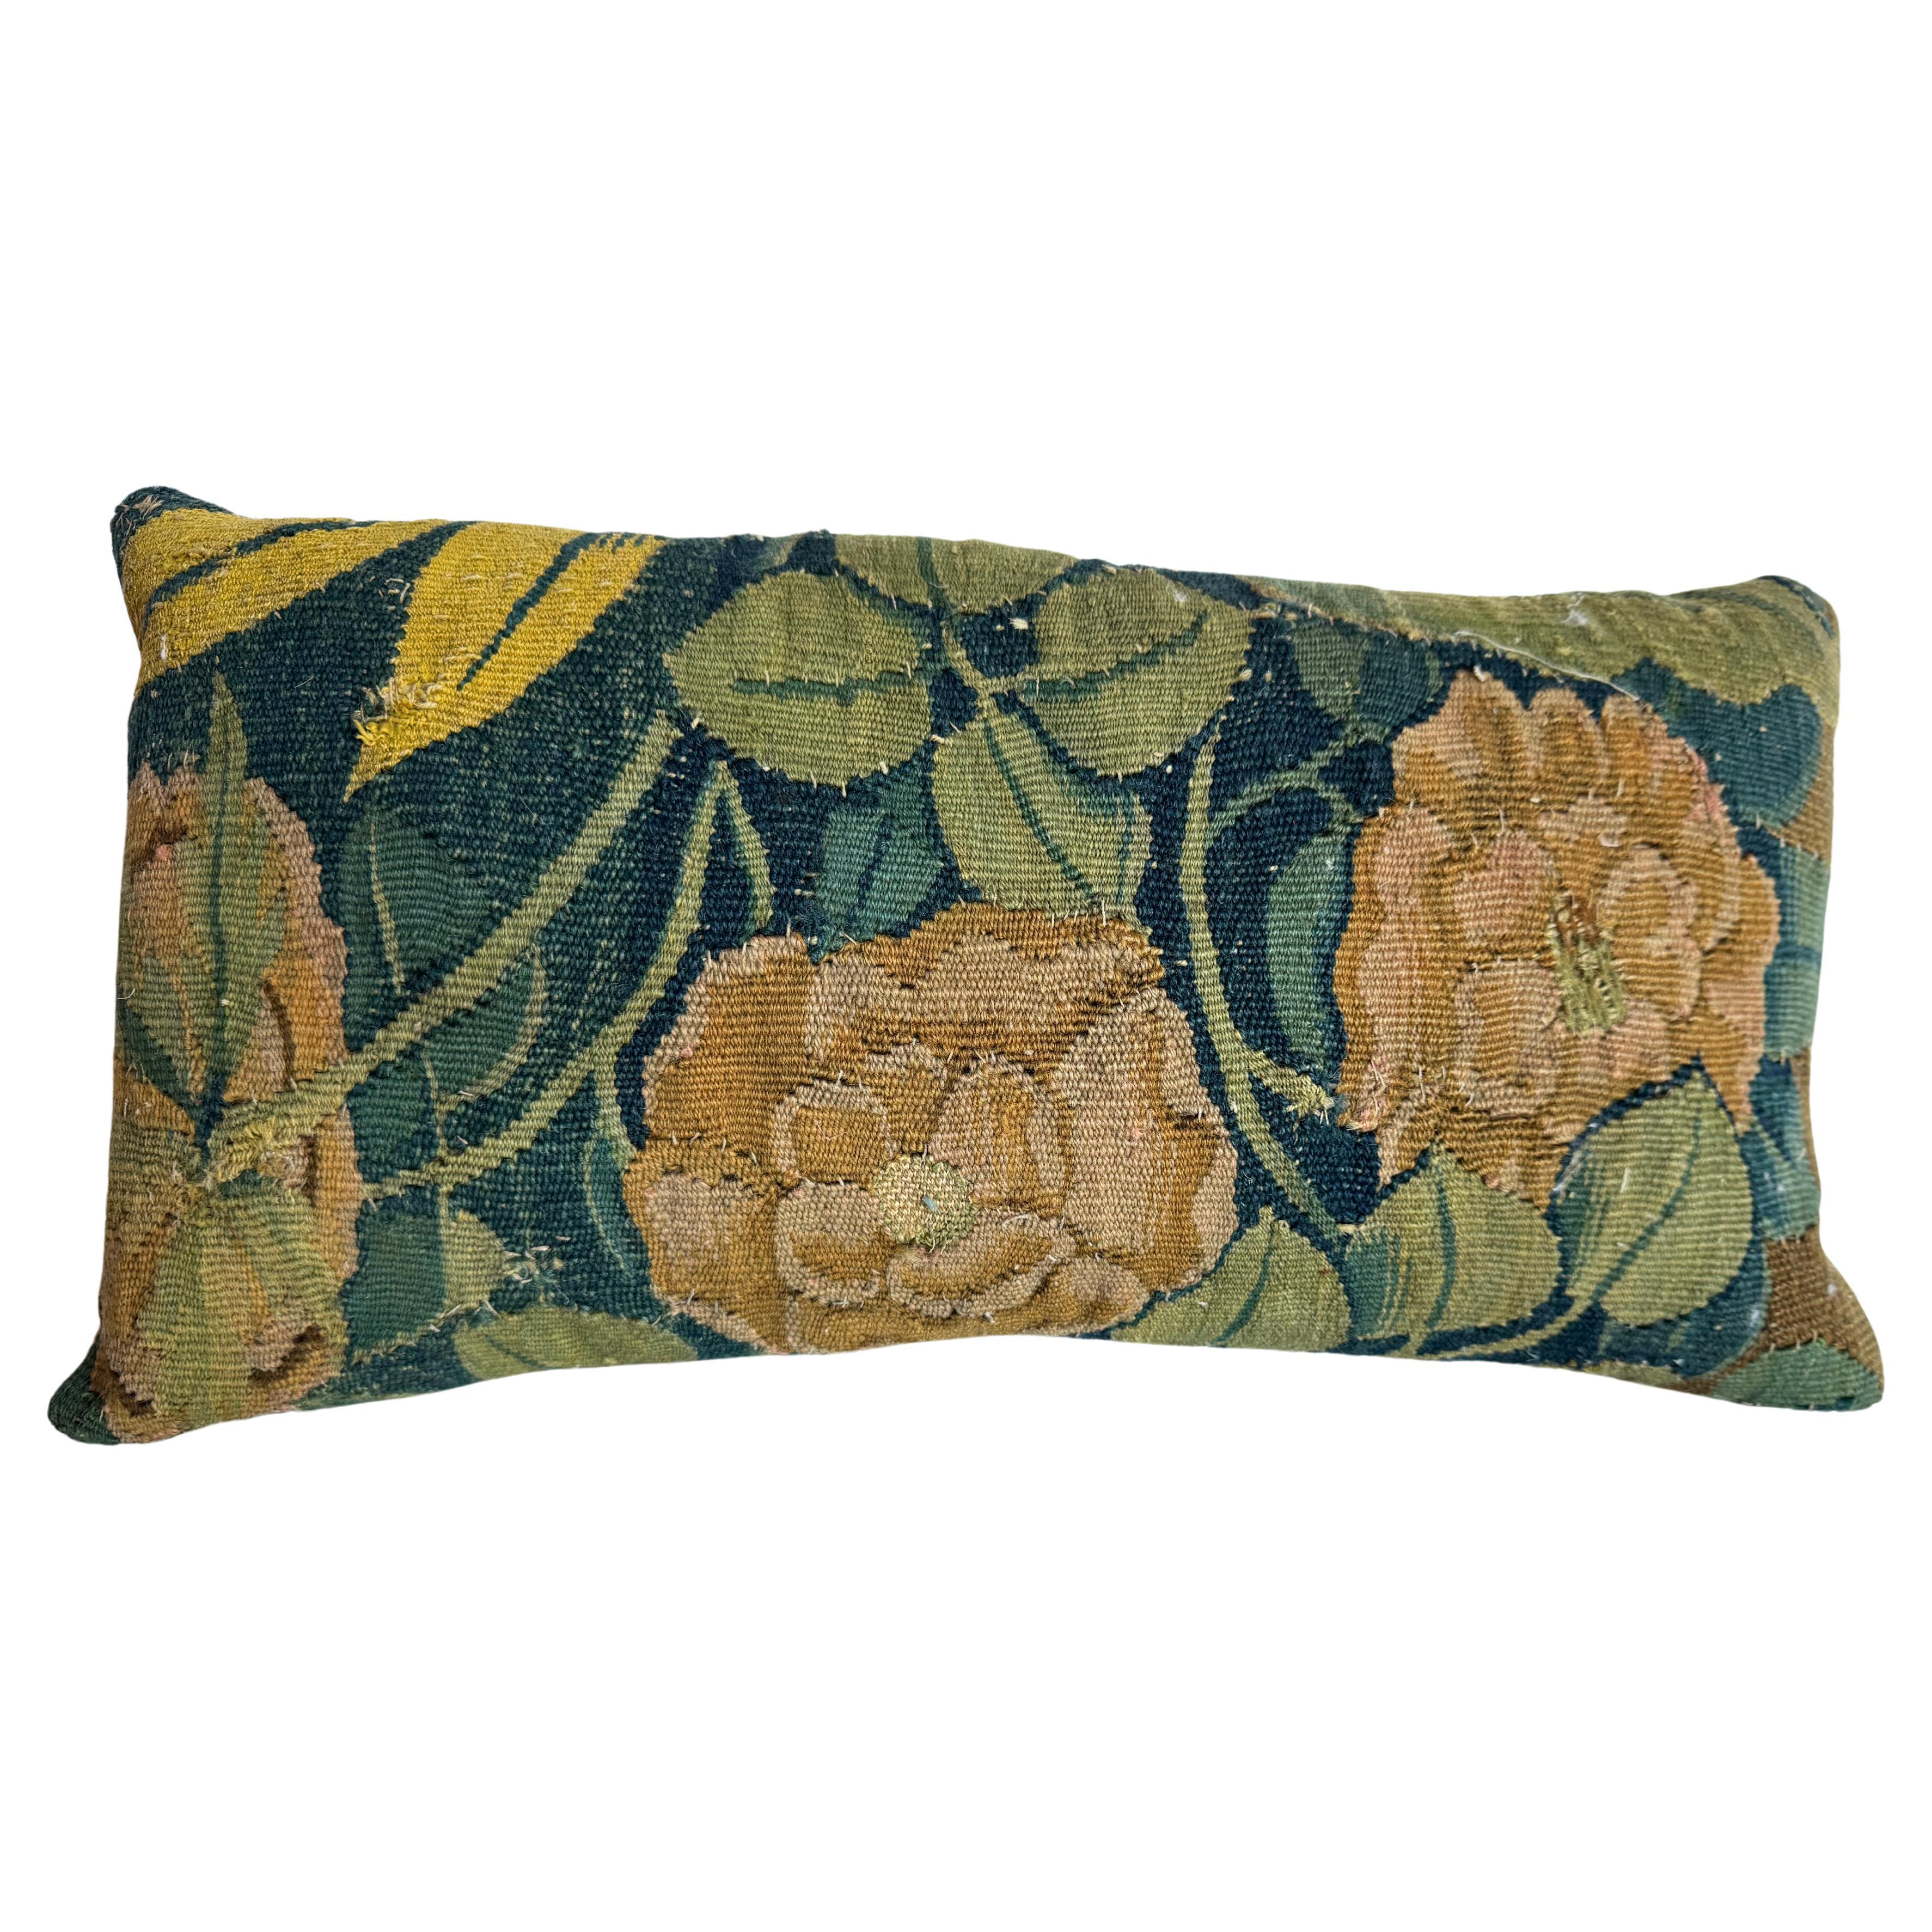  Brussels 16th Century Pillow - 19" X 10"